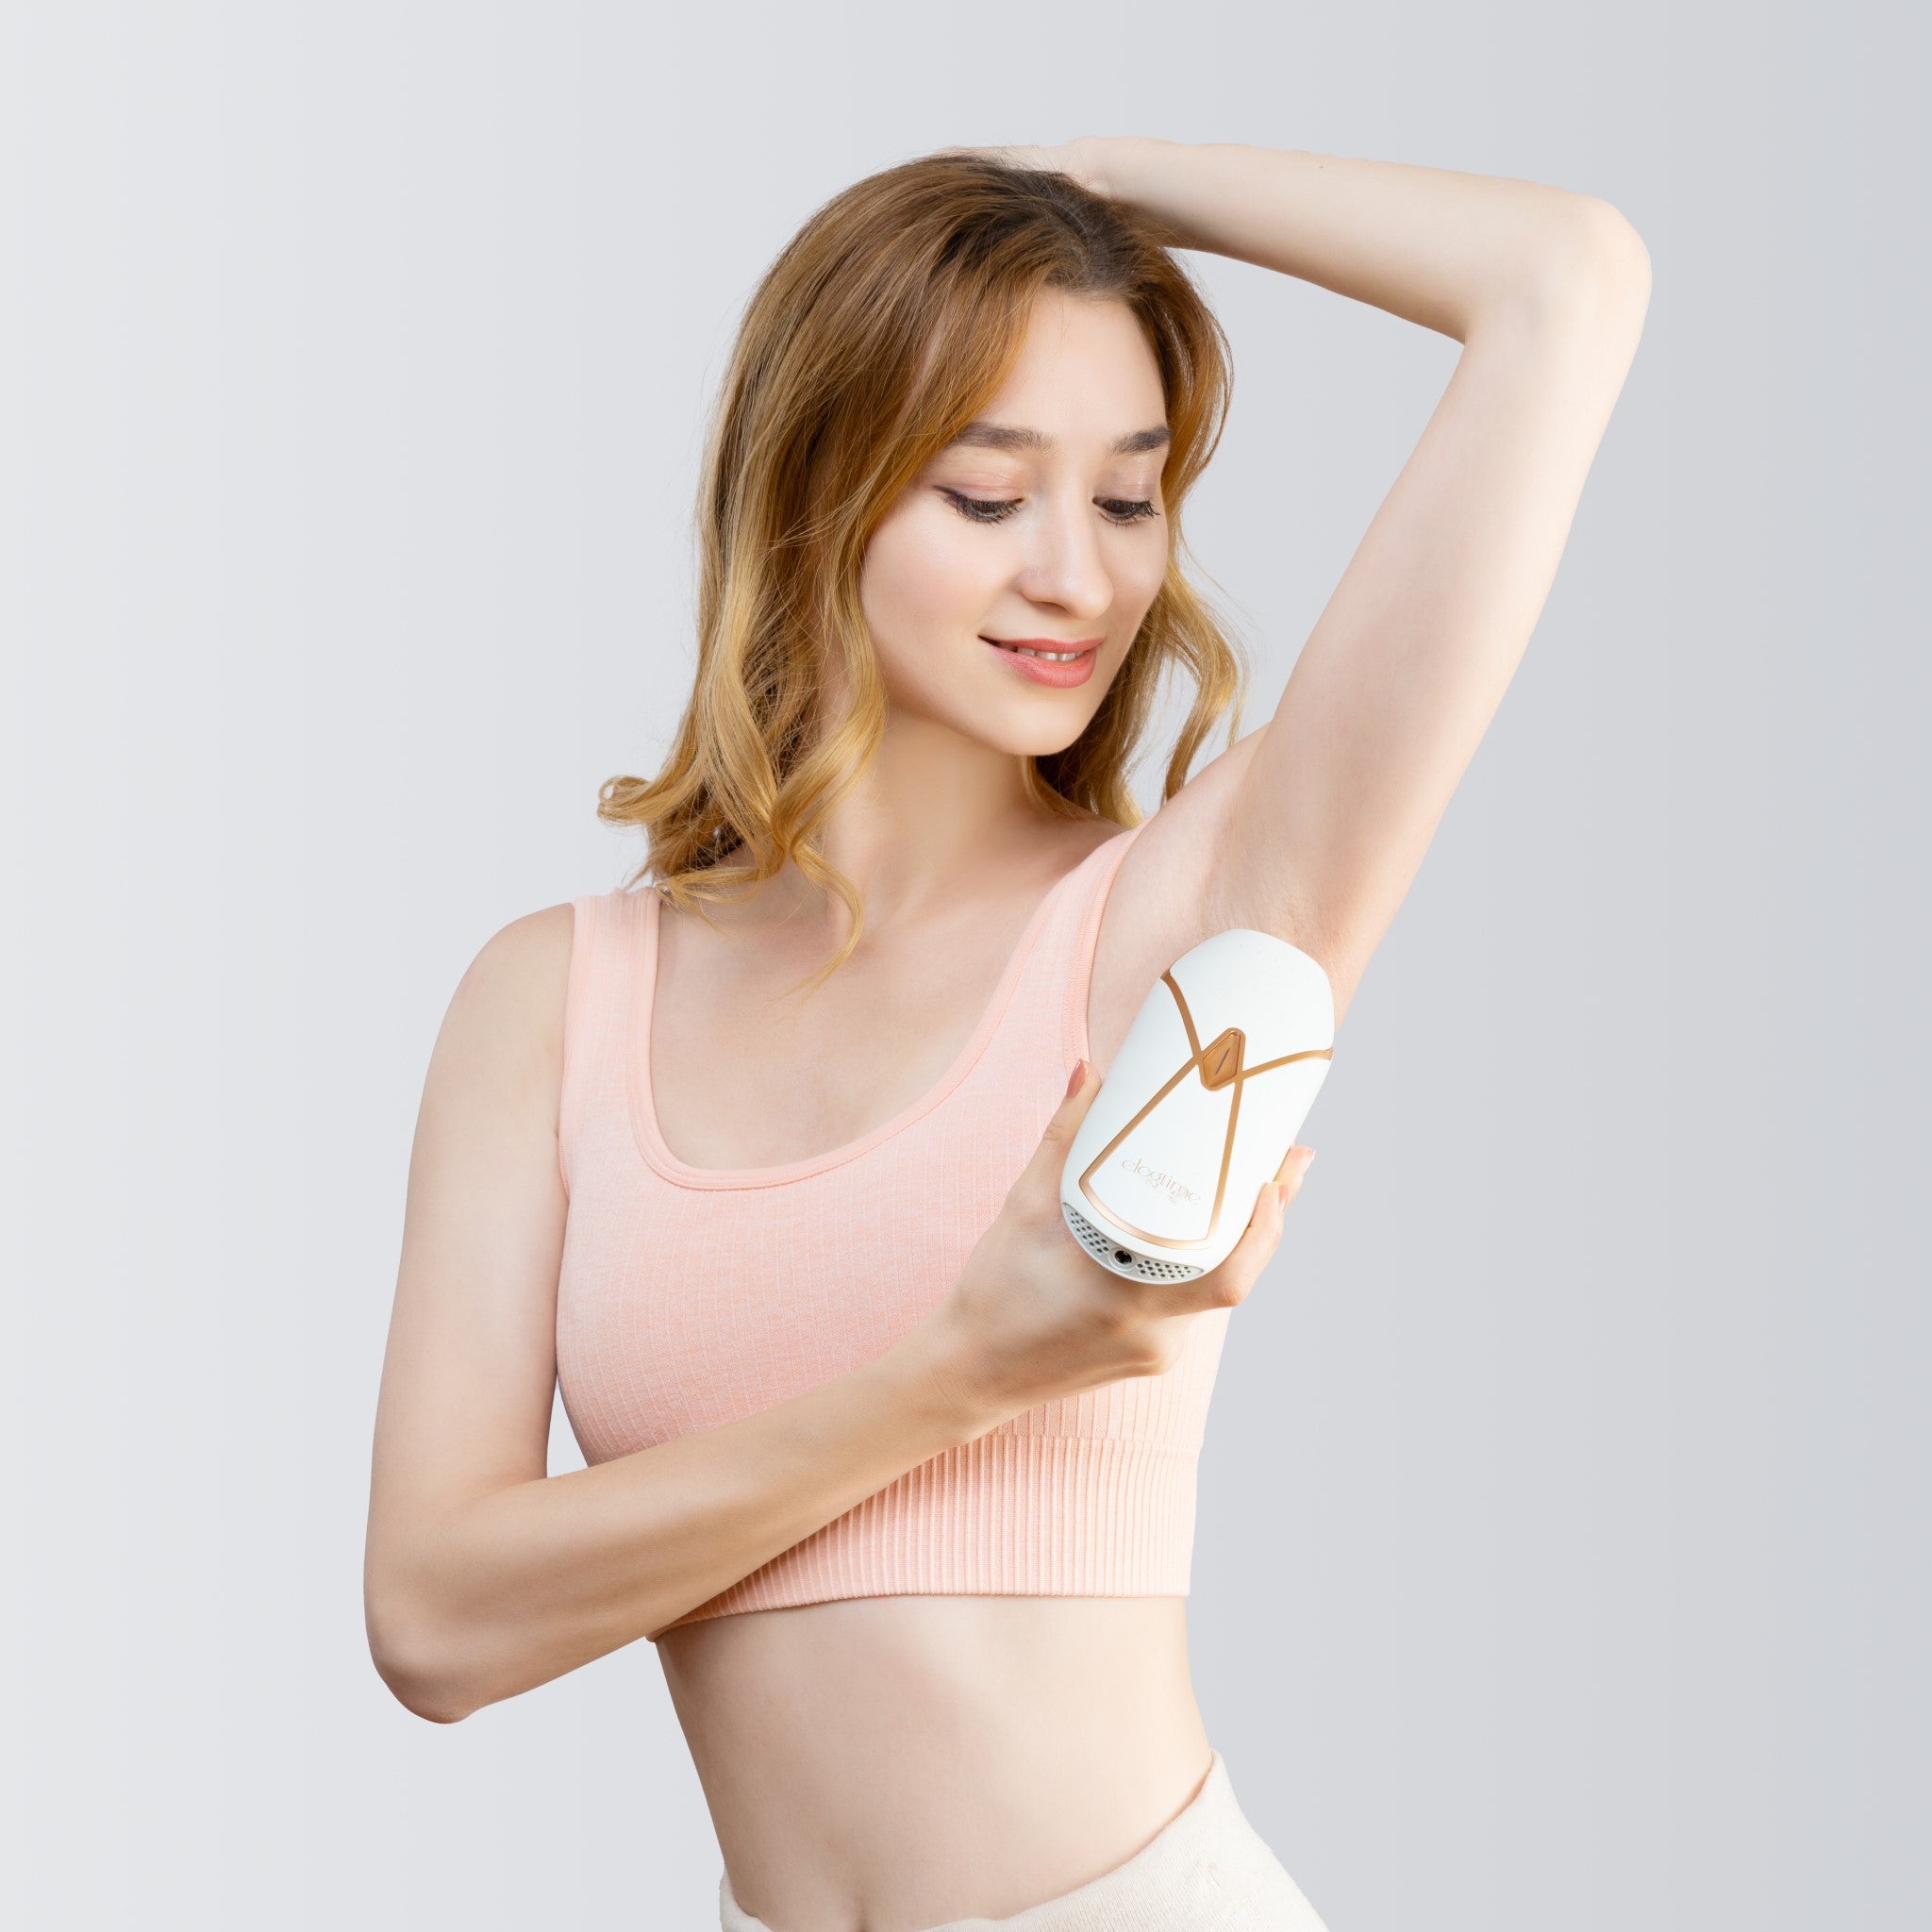 Product image of a beauty model wearing a pink crop top while using the Elegtime Sapphire IPL Hair Removal Handset - Troidini Edition on the underarm area.